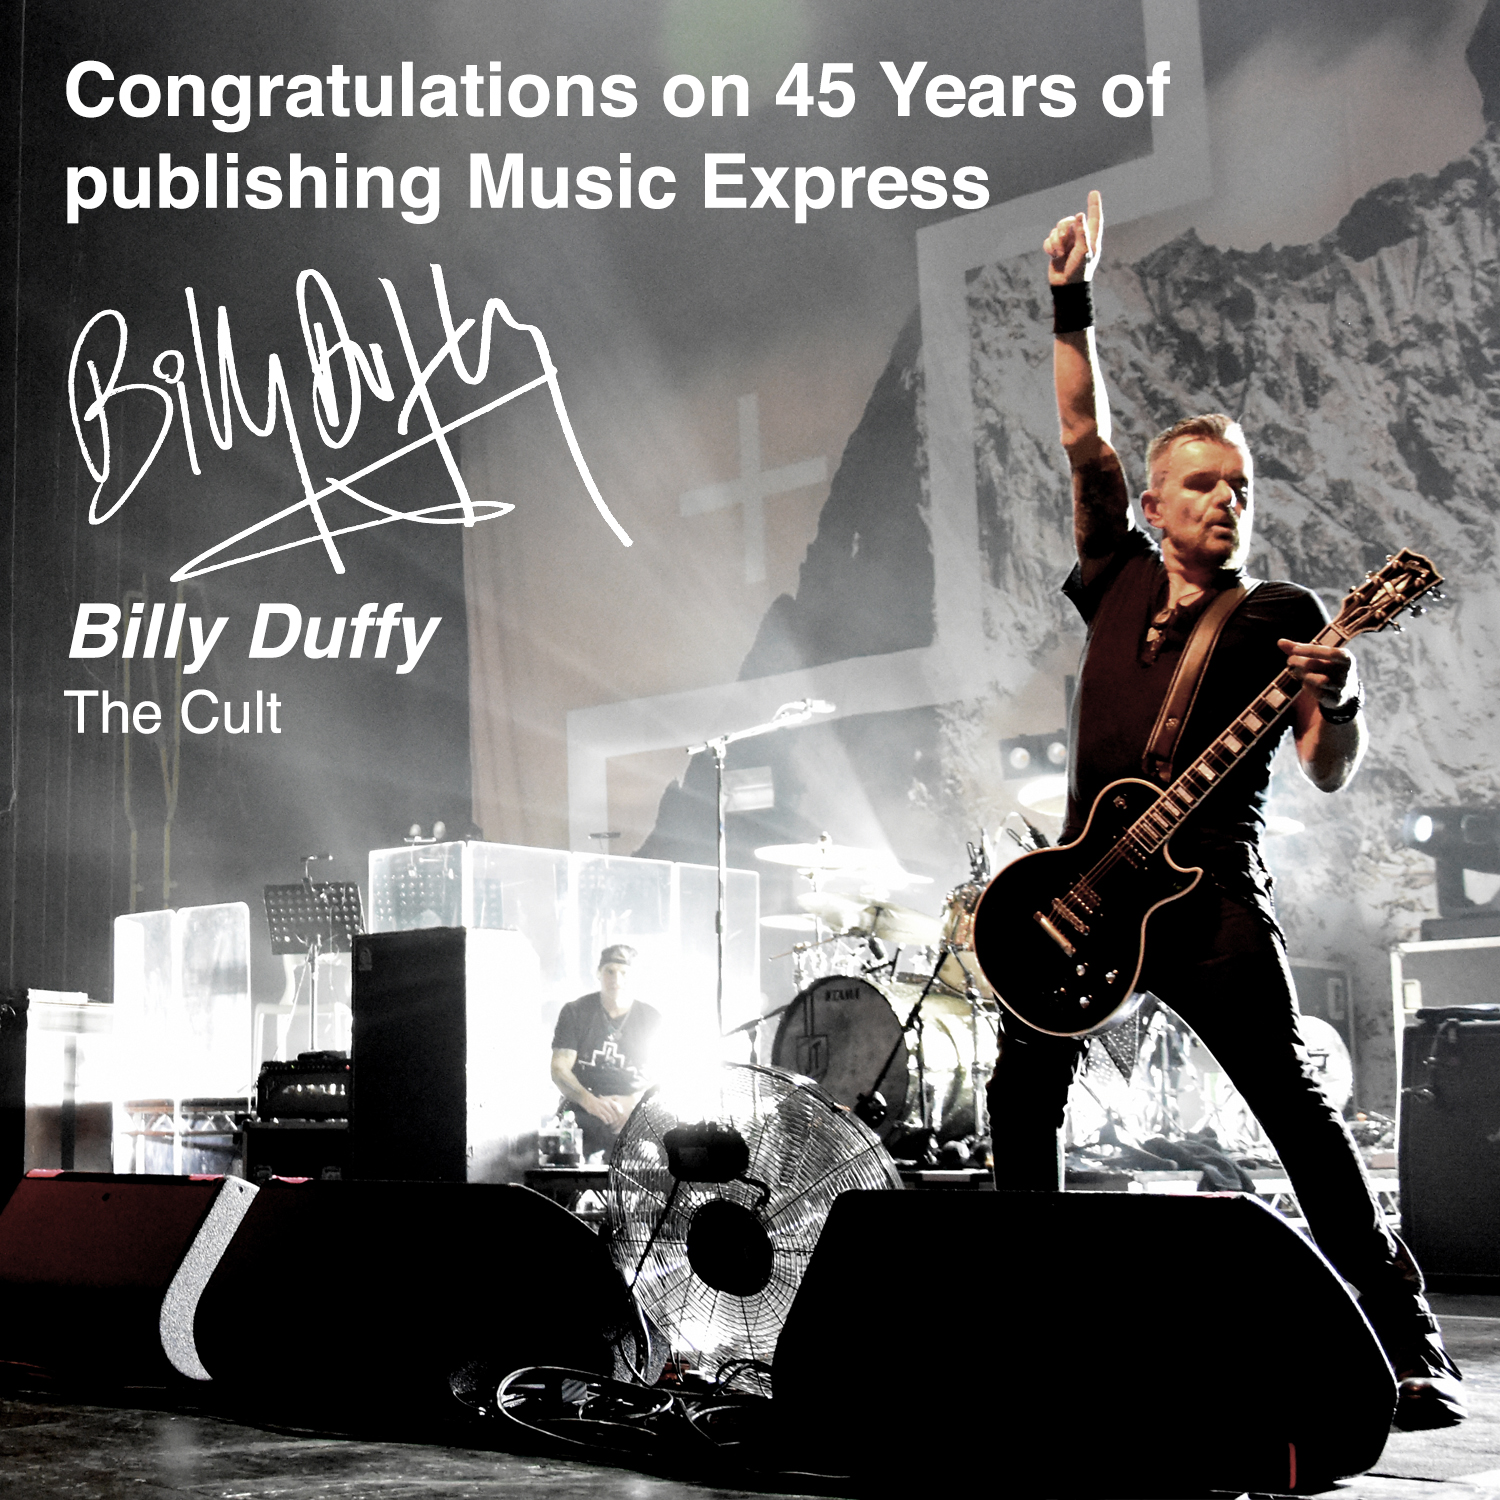 From The Cult Billy Duffy - Music Express 45th Anniversary - 2021